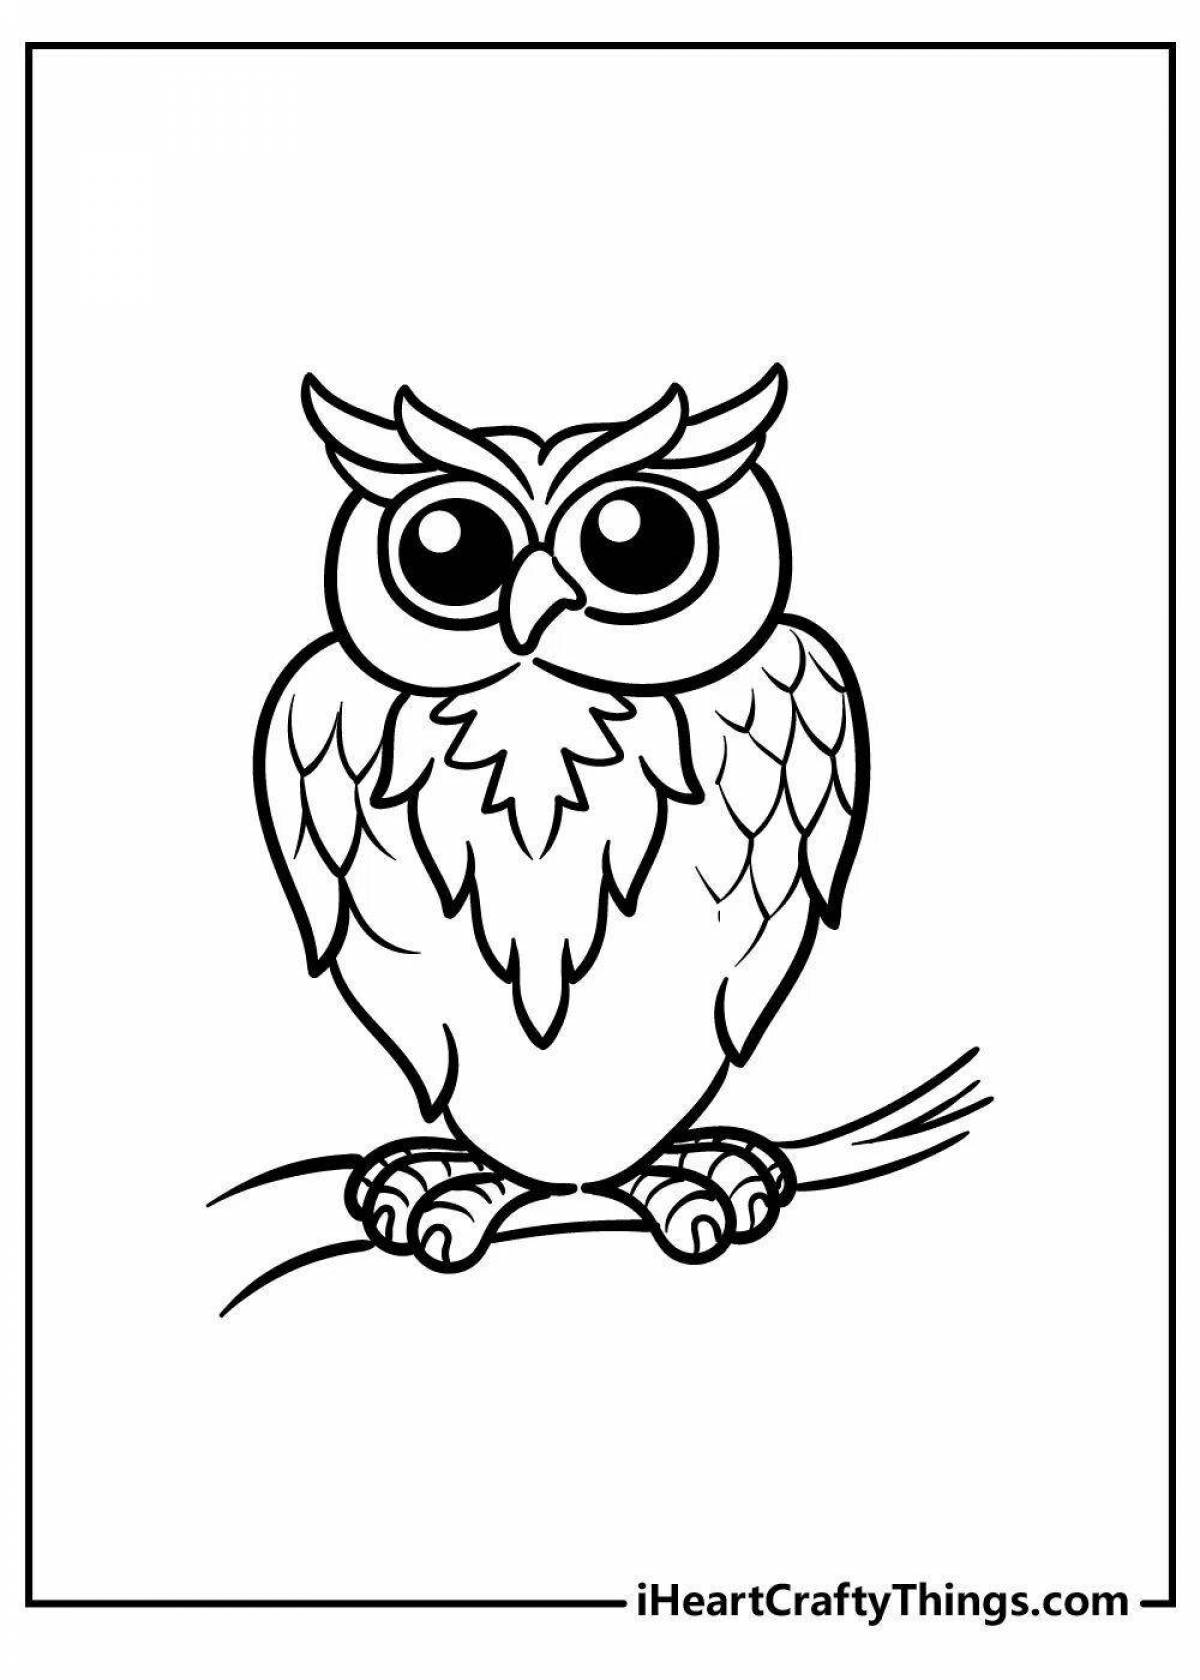 Joyful owl coloring book for children 6-7 years old